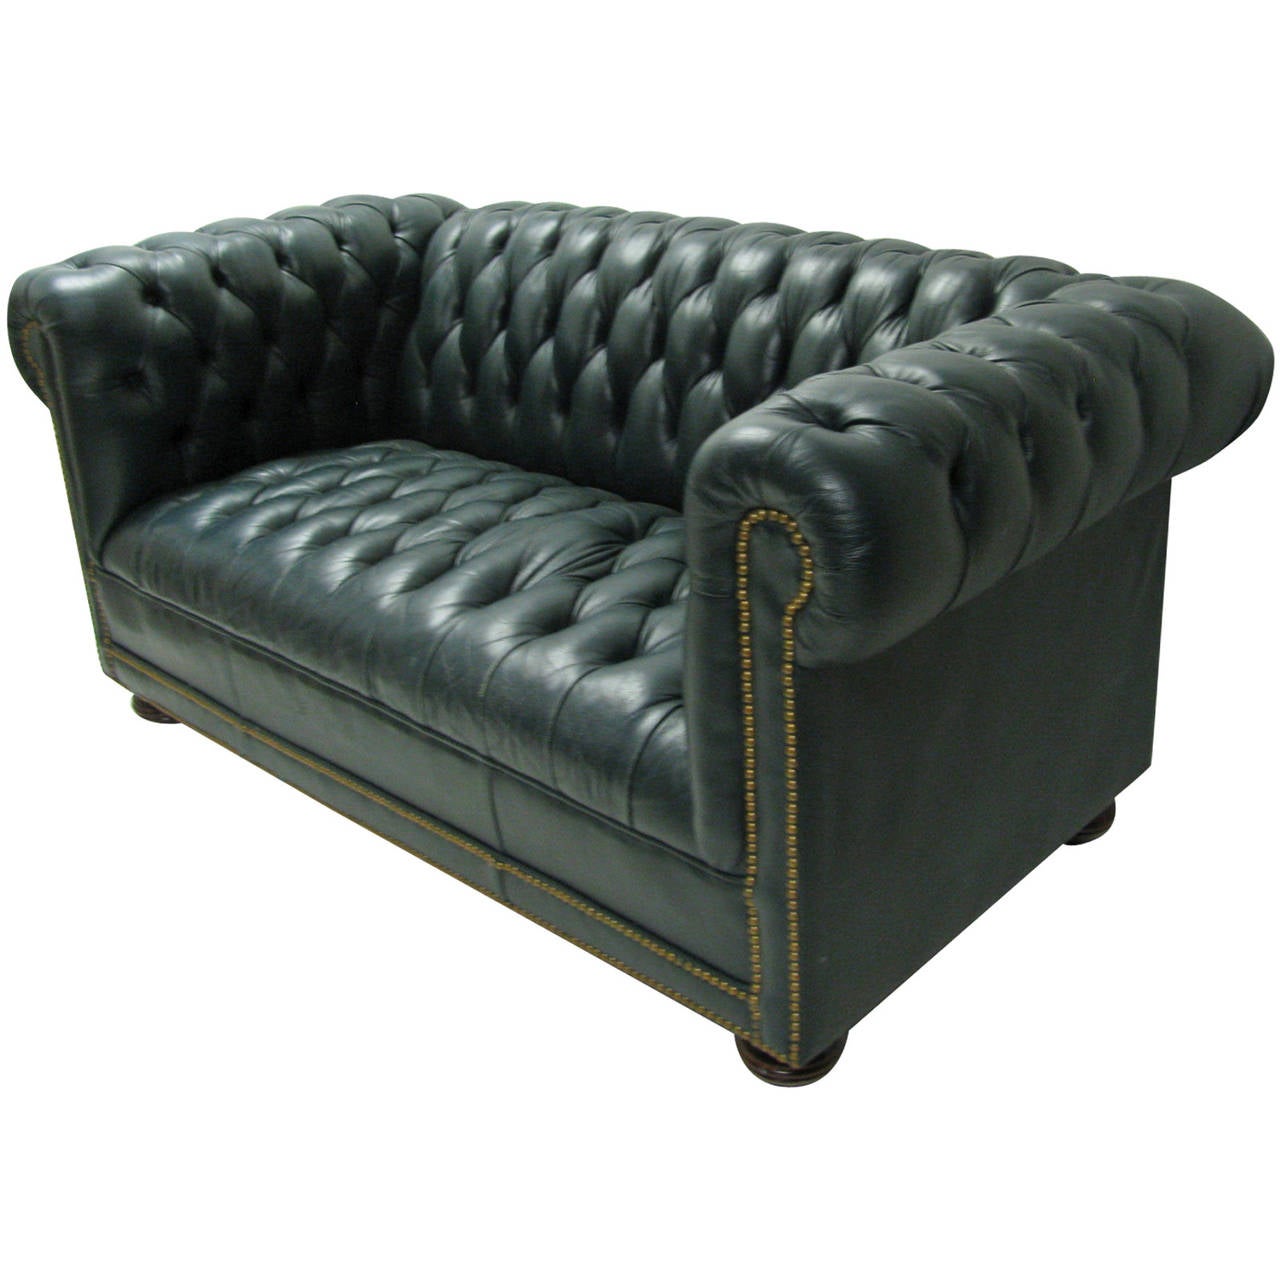 Classic Green Leather TwoSeat Chesterfield Sofa at 1stdibs